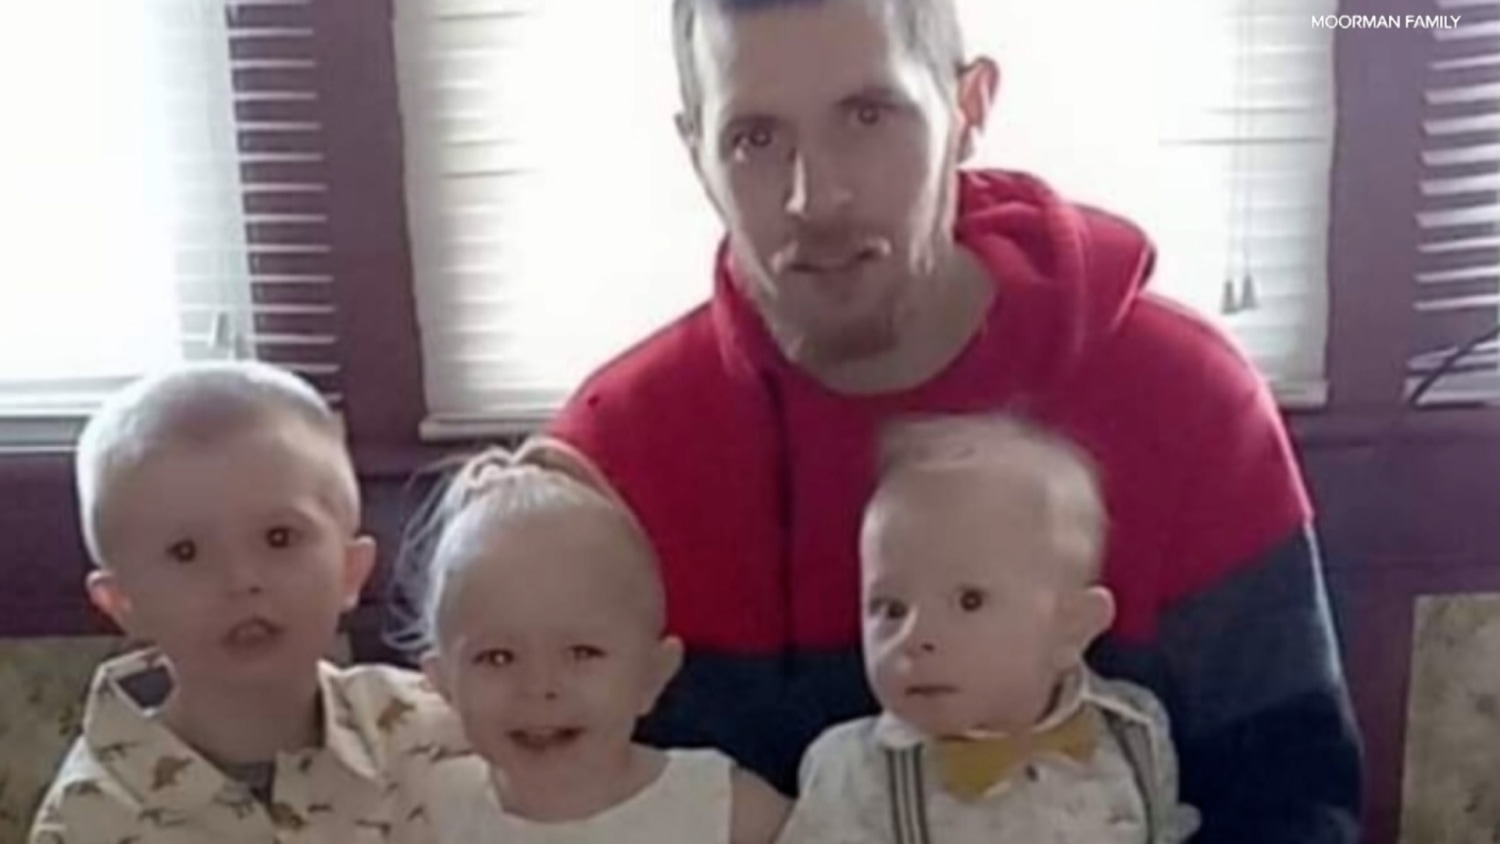 IMPD seeks help in finding missing Indianapolis father and kids